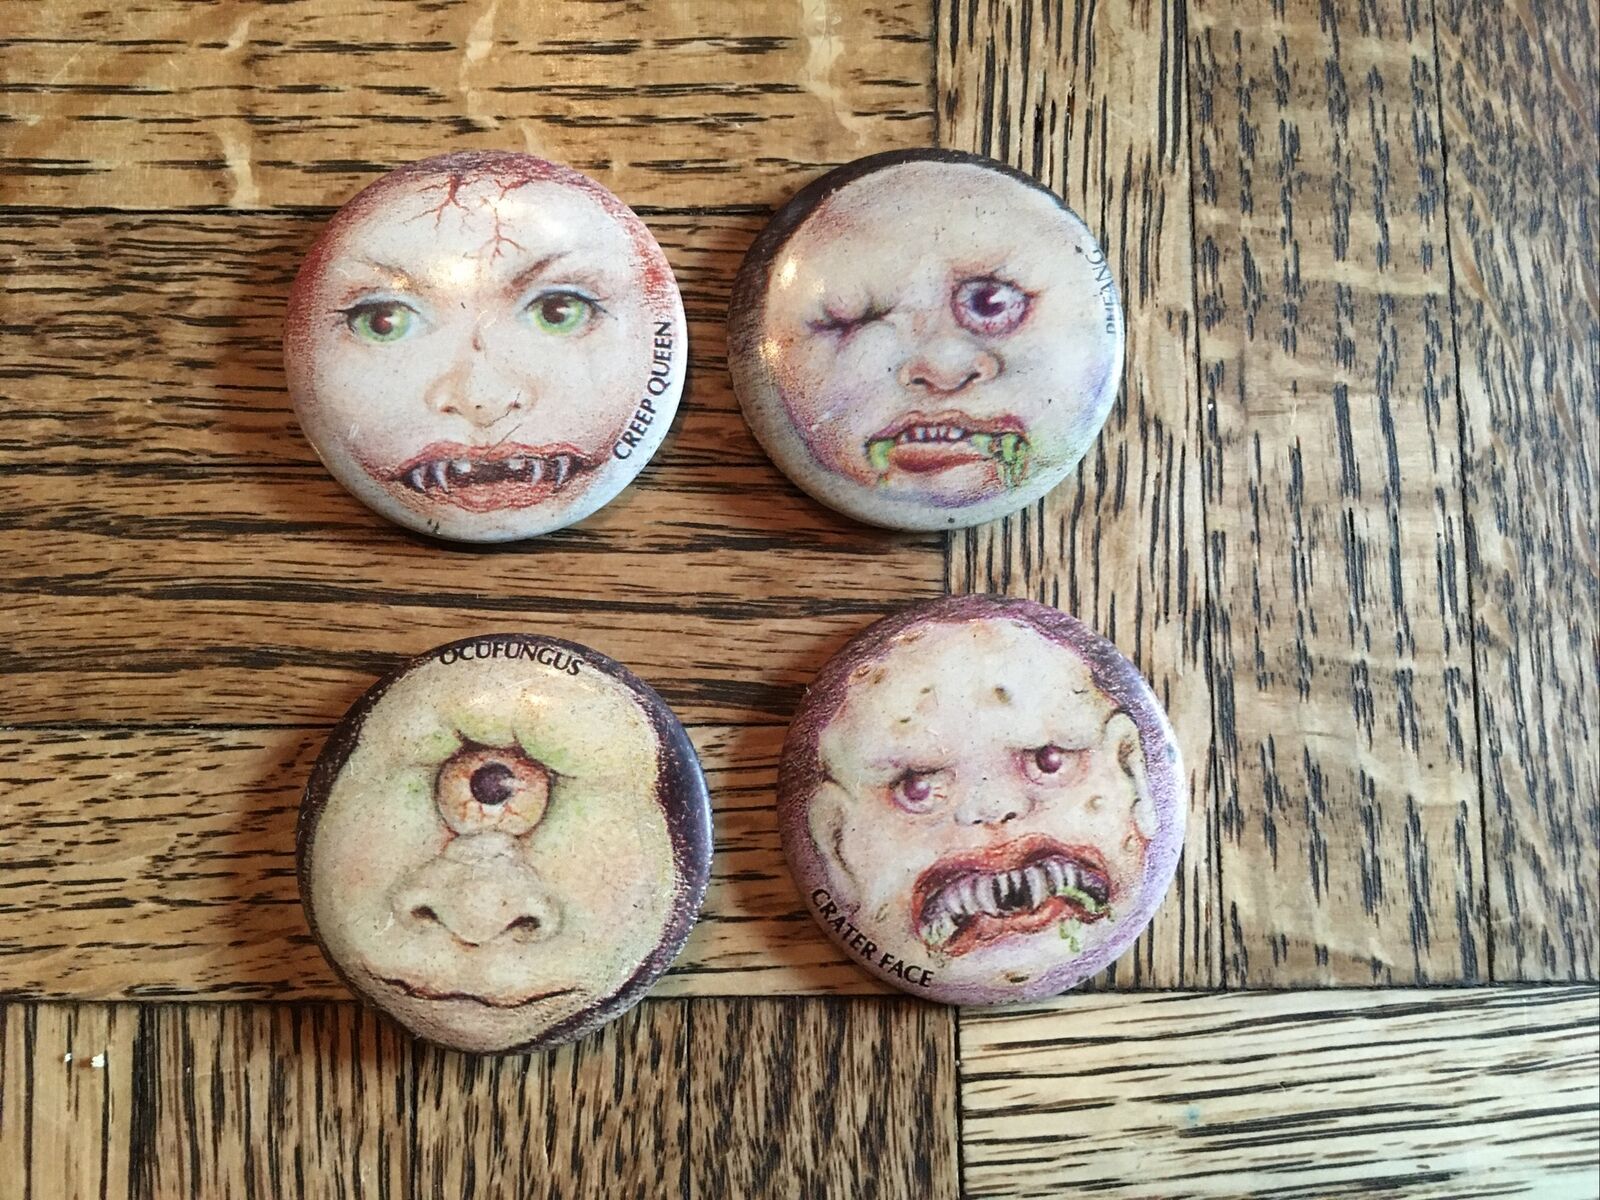 Vintage Characters - Creep Queen, Crater Face, Ocufungus, Rufang Pinback Buttons